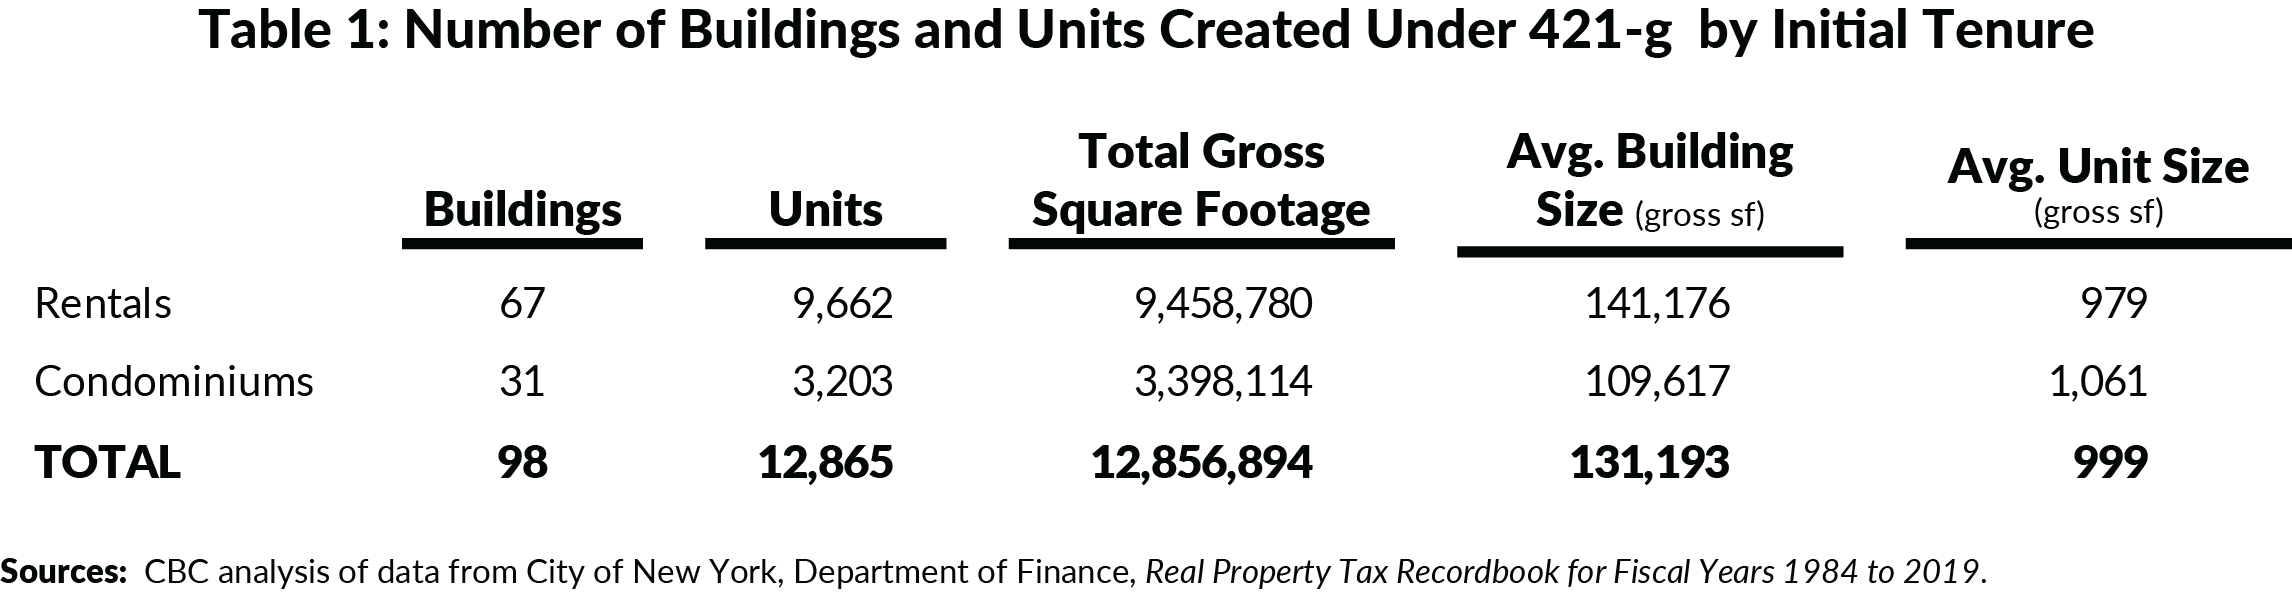 Table 1. Number of Buildings and Units Created Under 421-g by Initial Tenure